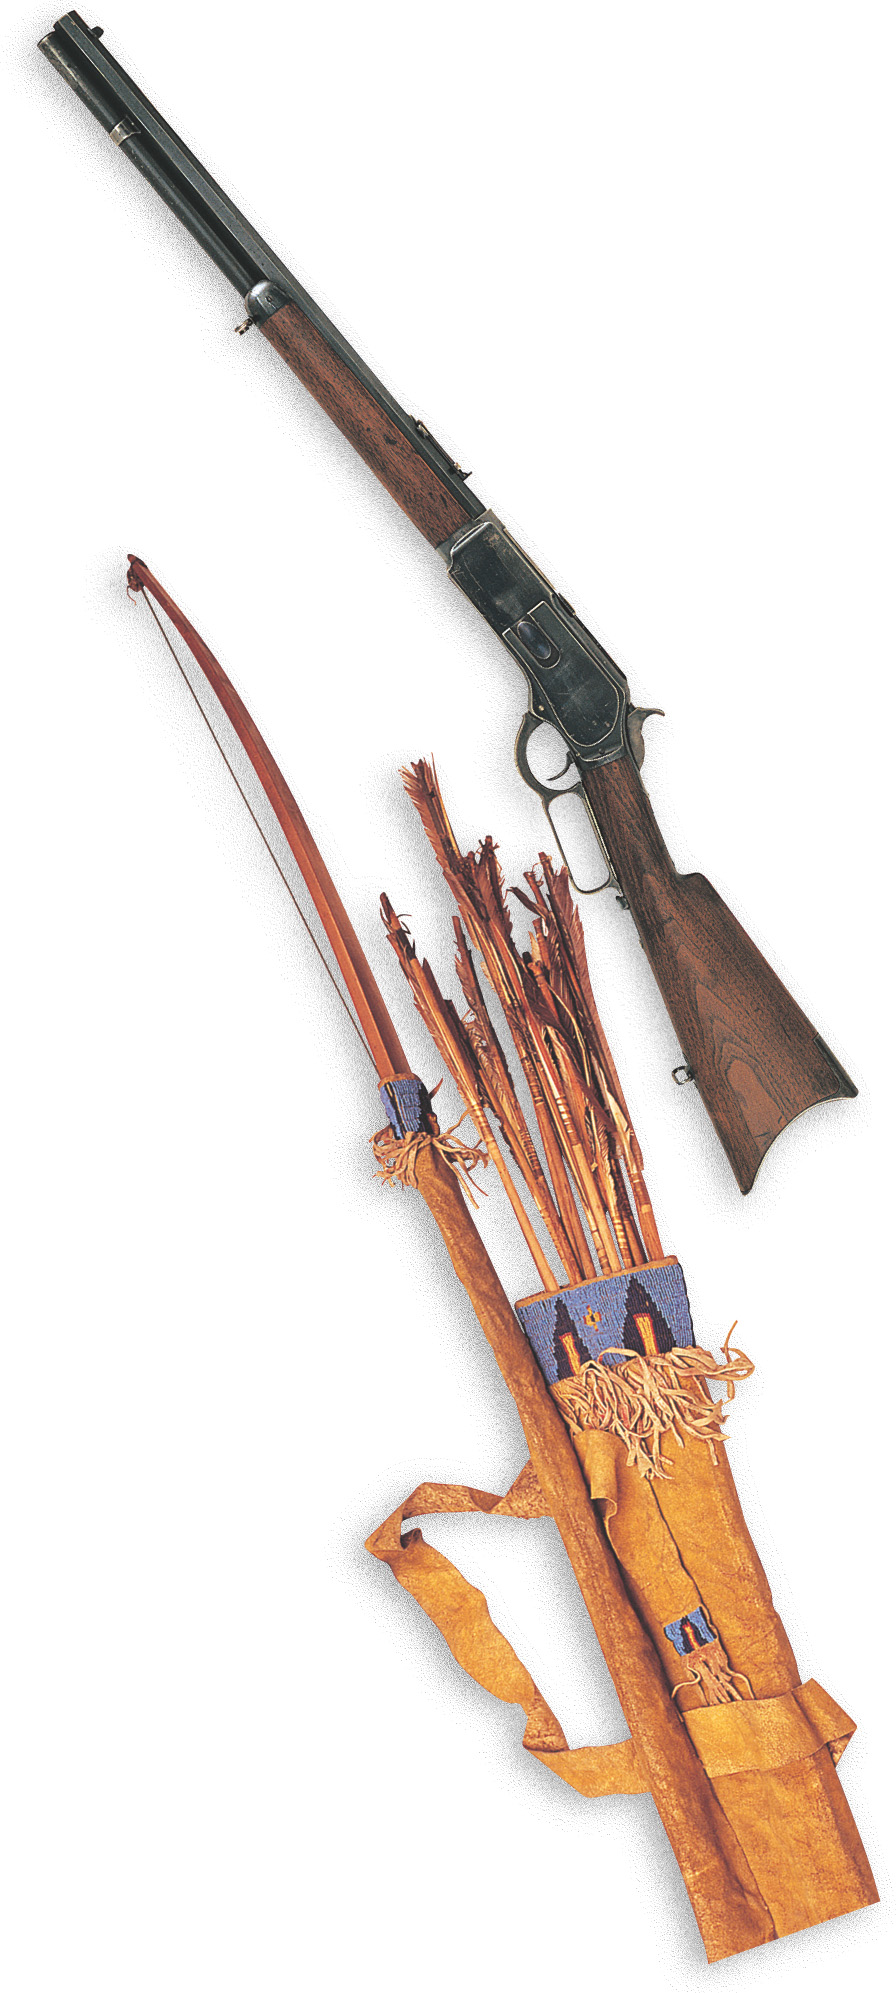 A photo of a Winchester rifle and a Native American bow with a quiver of arrows.